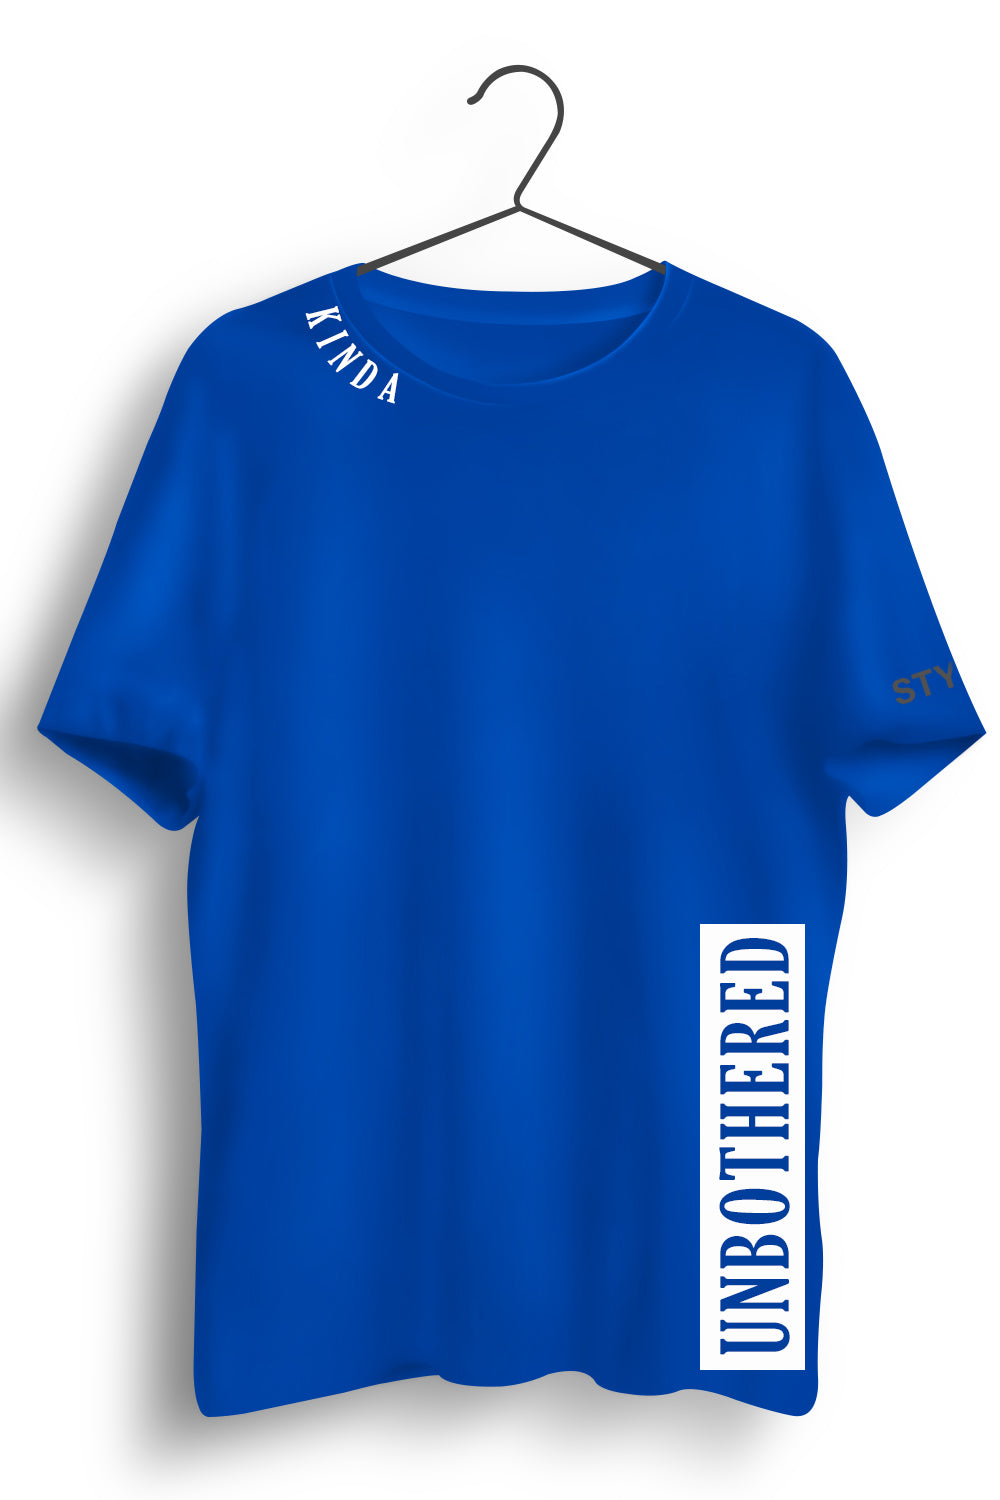 Unbothered Graphic Printed Blue Tshirt